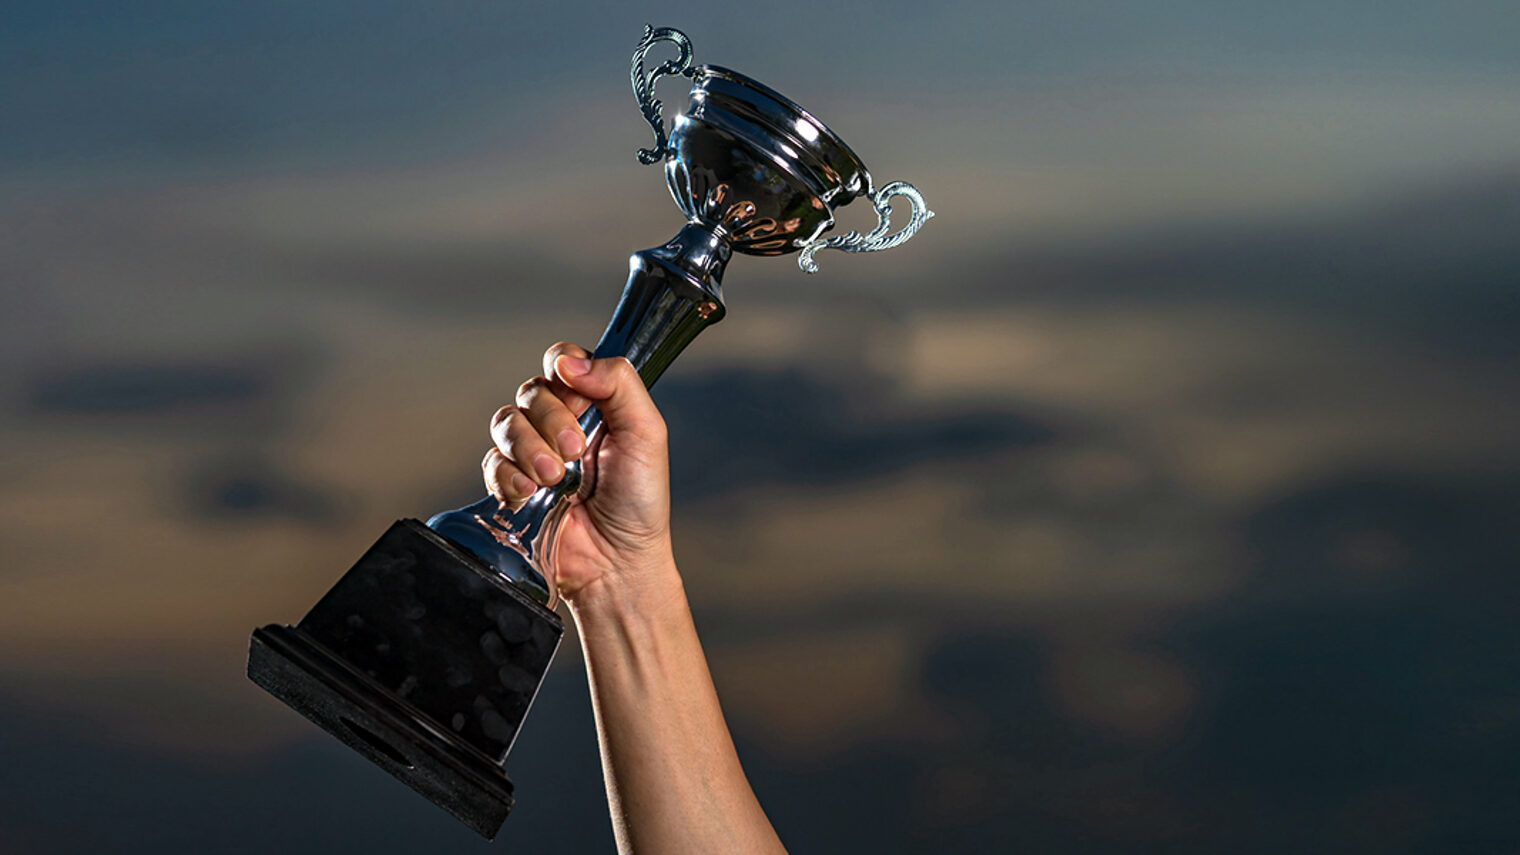 a man holding up a trophy cup on against cloudy twilight sky background, The winner and successful concept Schlagwort(e): trust, first place, trophycup, teamwork, trophy cup, photography, cloudscape, achieve, championship, 1st, background, leader, concept, metal, golden, gold, best, successful, reward, event, achievement, competition, award, trophy, victory, celebration, success, cup, business, ceremony, sport, hand, first, motivation, holding, men, place, up, inspiration, sky, winning, athlete, ideas, blue, human, prize, leadership, win, winner, champion, trust, first place, trophycup, teamwork, trophy cup, photography, cloudscape, achieve, championship, 1st, background, leader, concept, metal, golden, gold, best, successful, reward, event, achievement, competition, award, trophy, victory, celebration, success, cup, business, ceremony, sport, hand, first, motivation, holding, men, place, up, inspiration, sky, winning, athlete, ideas, blue, human, prize, leadership, win, winner, champion